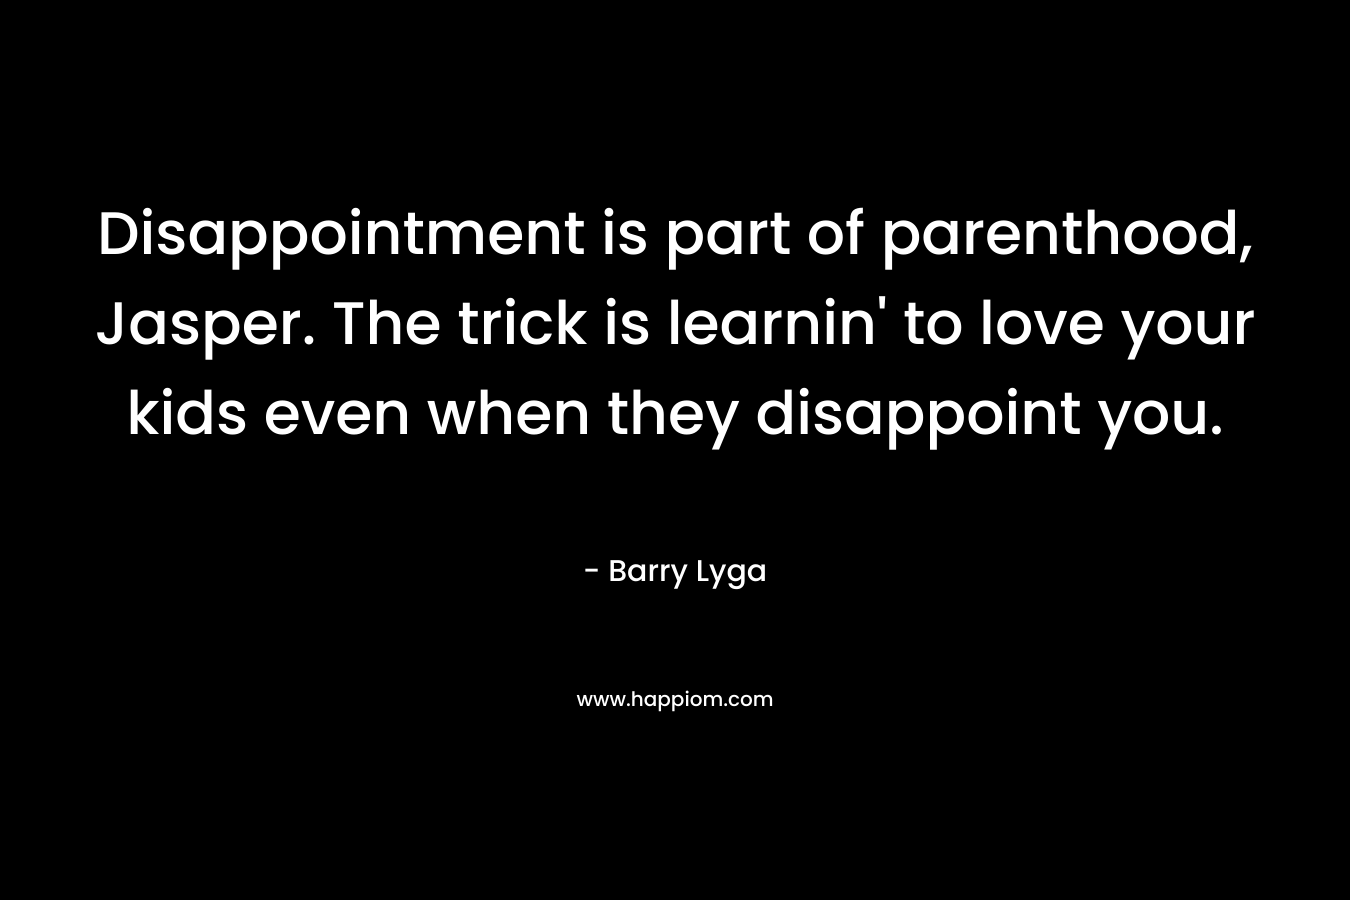 Disappointment is part of parenthood, Jasper. The trick is learnin’ to love your kids even when they disappoint you. – Barry Lyga